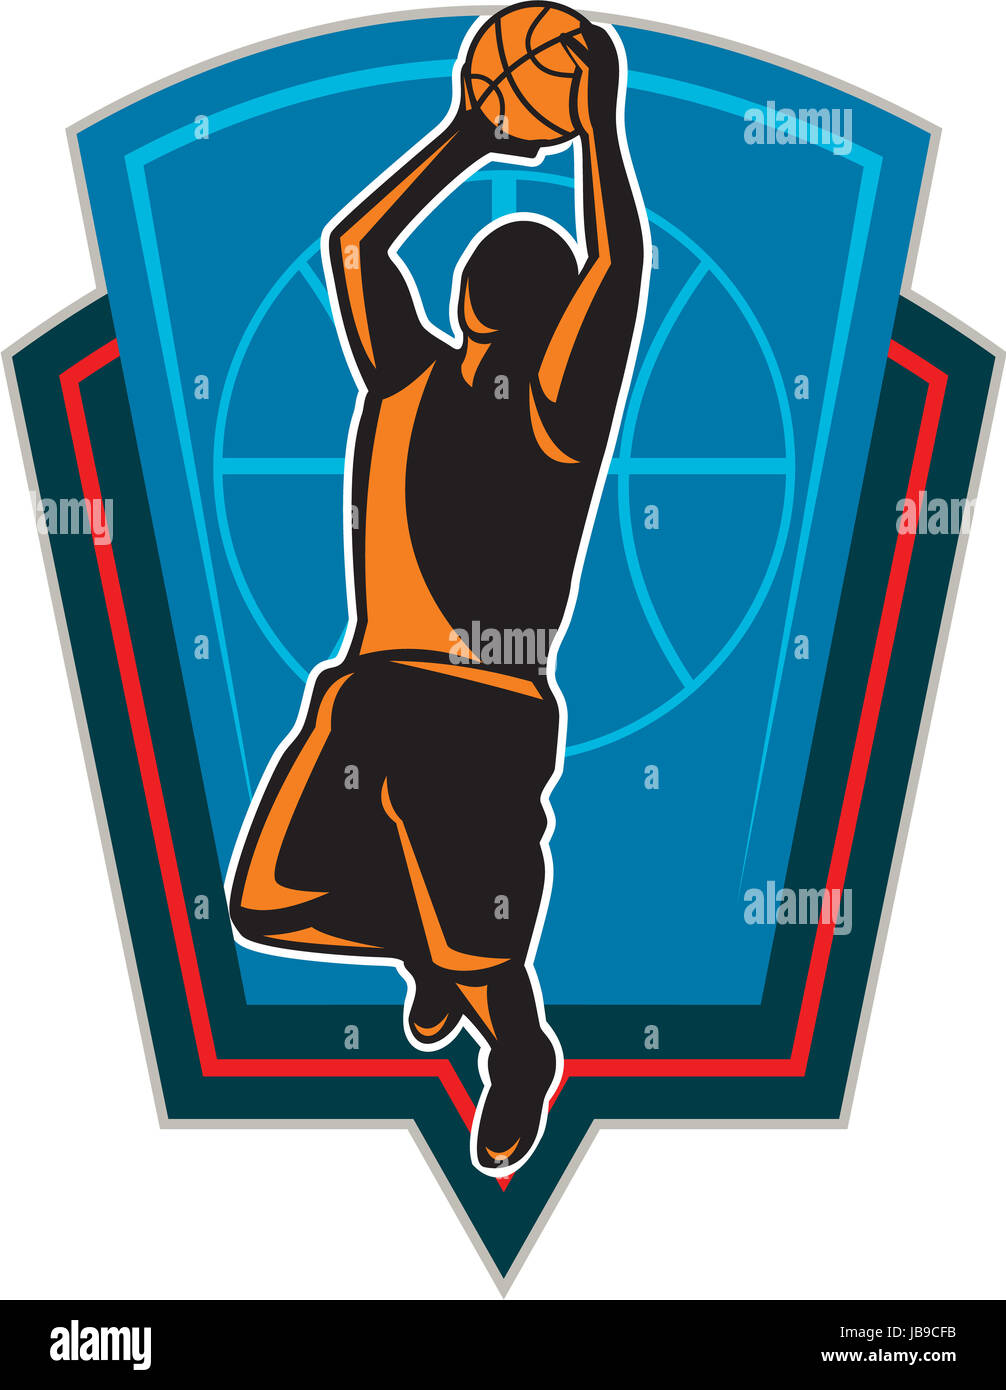 Illustration of a basketball player dunking rebounding ball set inside shield crest done in retro style on isolated background. Stock Photo